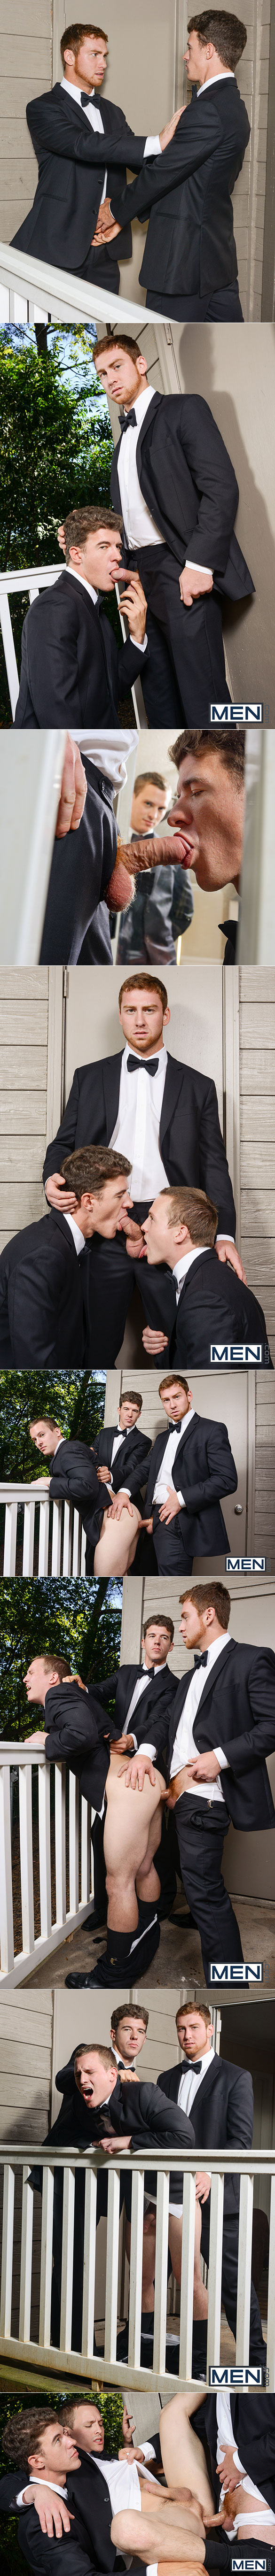 Men.com: Connor Maguire and JJ Knight fuck Tommy Regan in "The Groomsmen, Part 2"